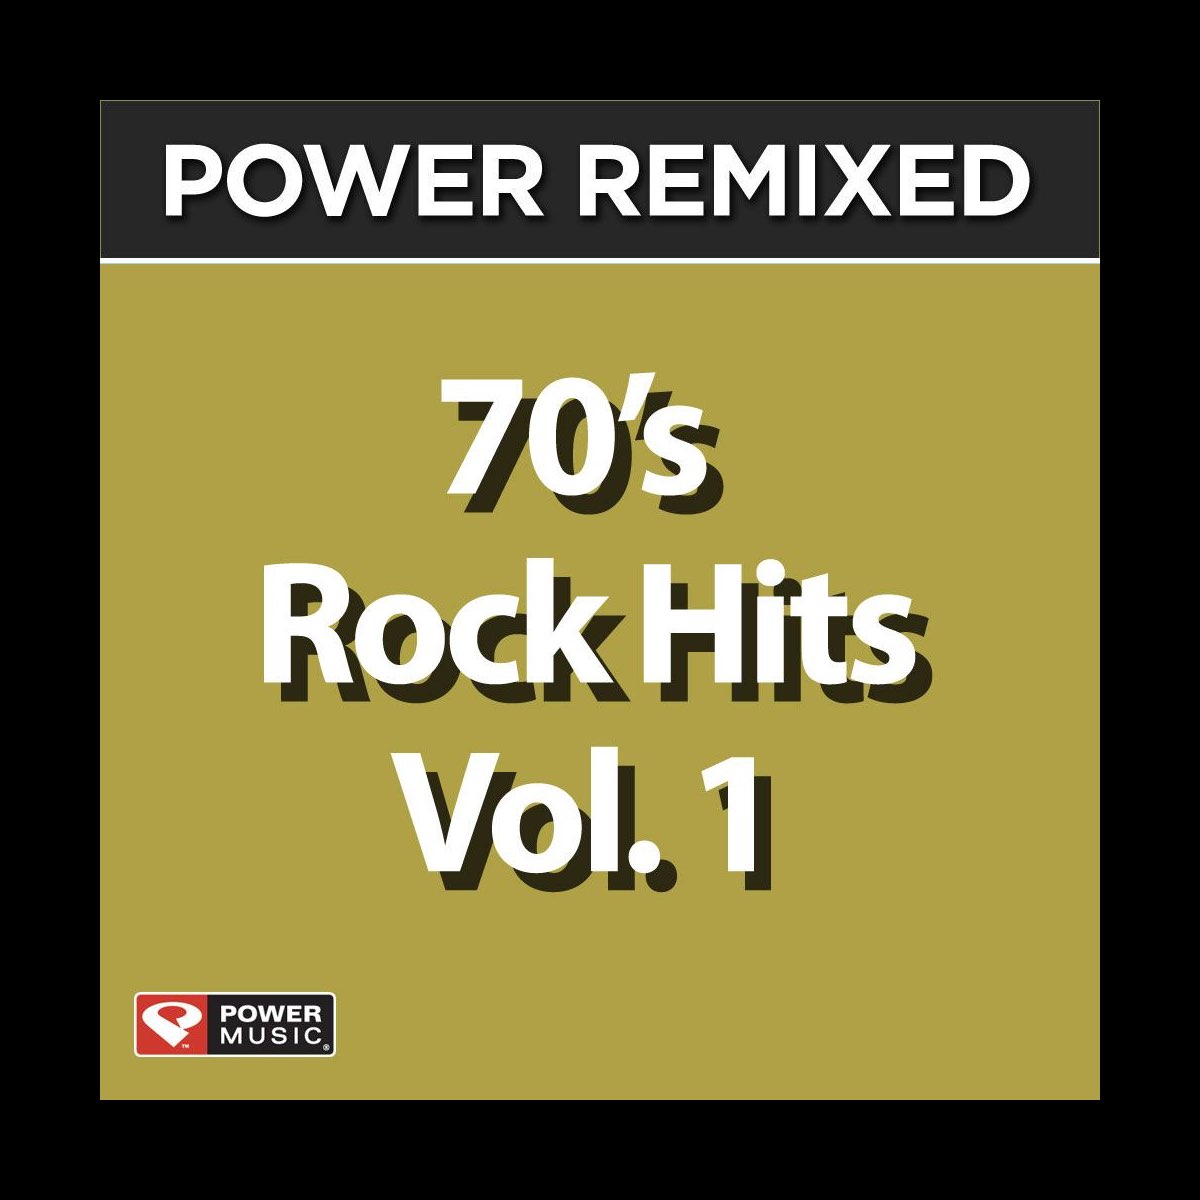 Power Remixed: 70's Rock Hits, Vol. 1 - Album by Power Music Workout -  Apple Music